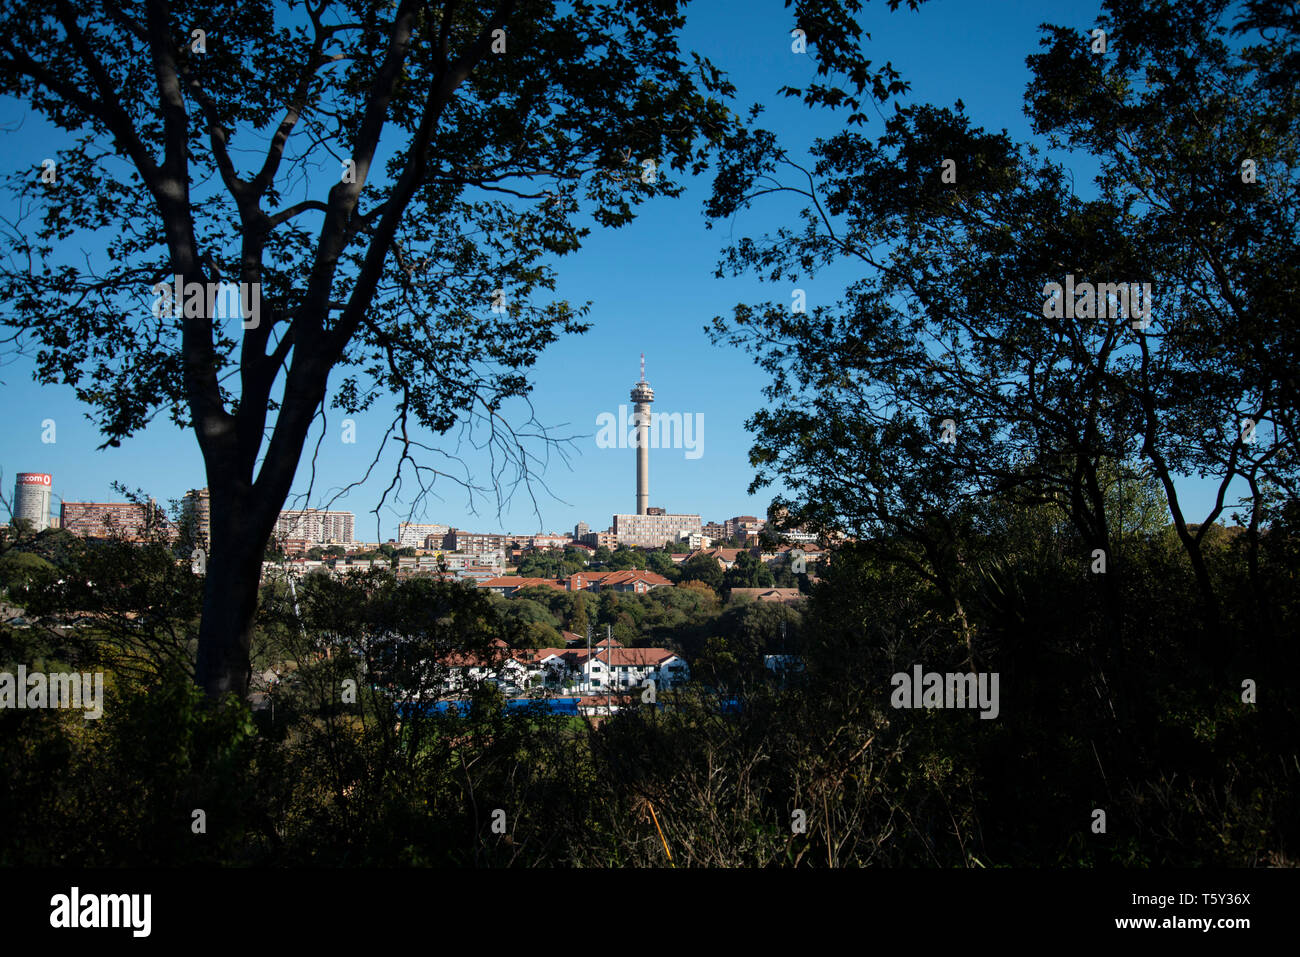 Johannesburg, South Africa, 27th April, 2019. The iconic Hillbrow tower of the Johannesburg skyline framed by trees growing in The Wilds, a recently restored public park near the city centre. Credit: Eva-Lotta Jansson/Alamy Stock Photo